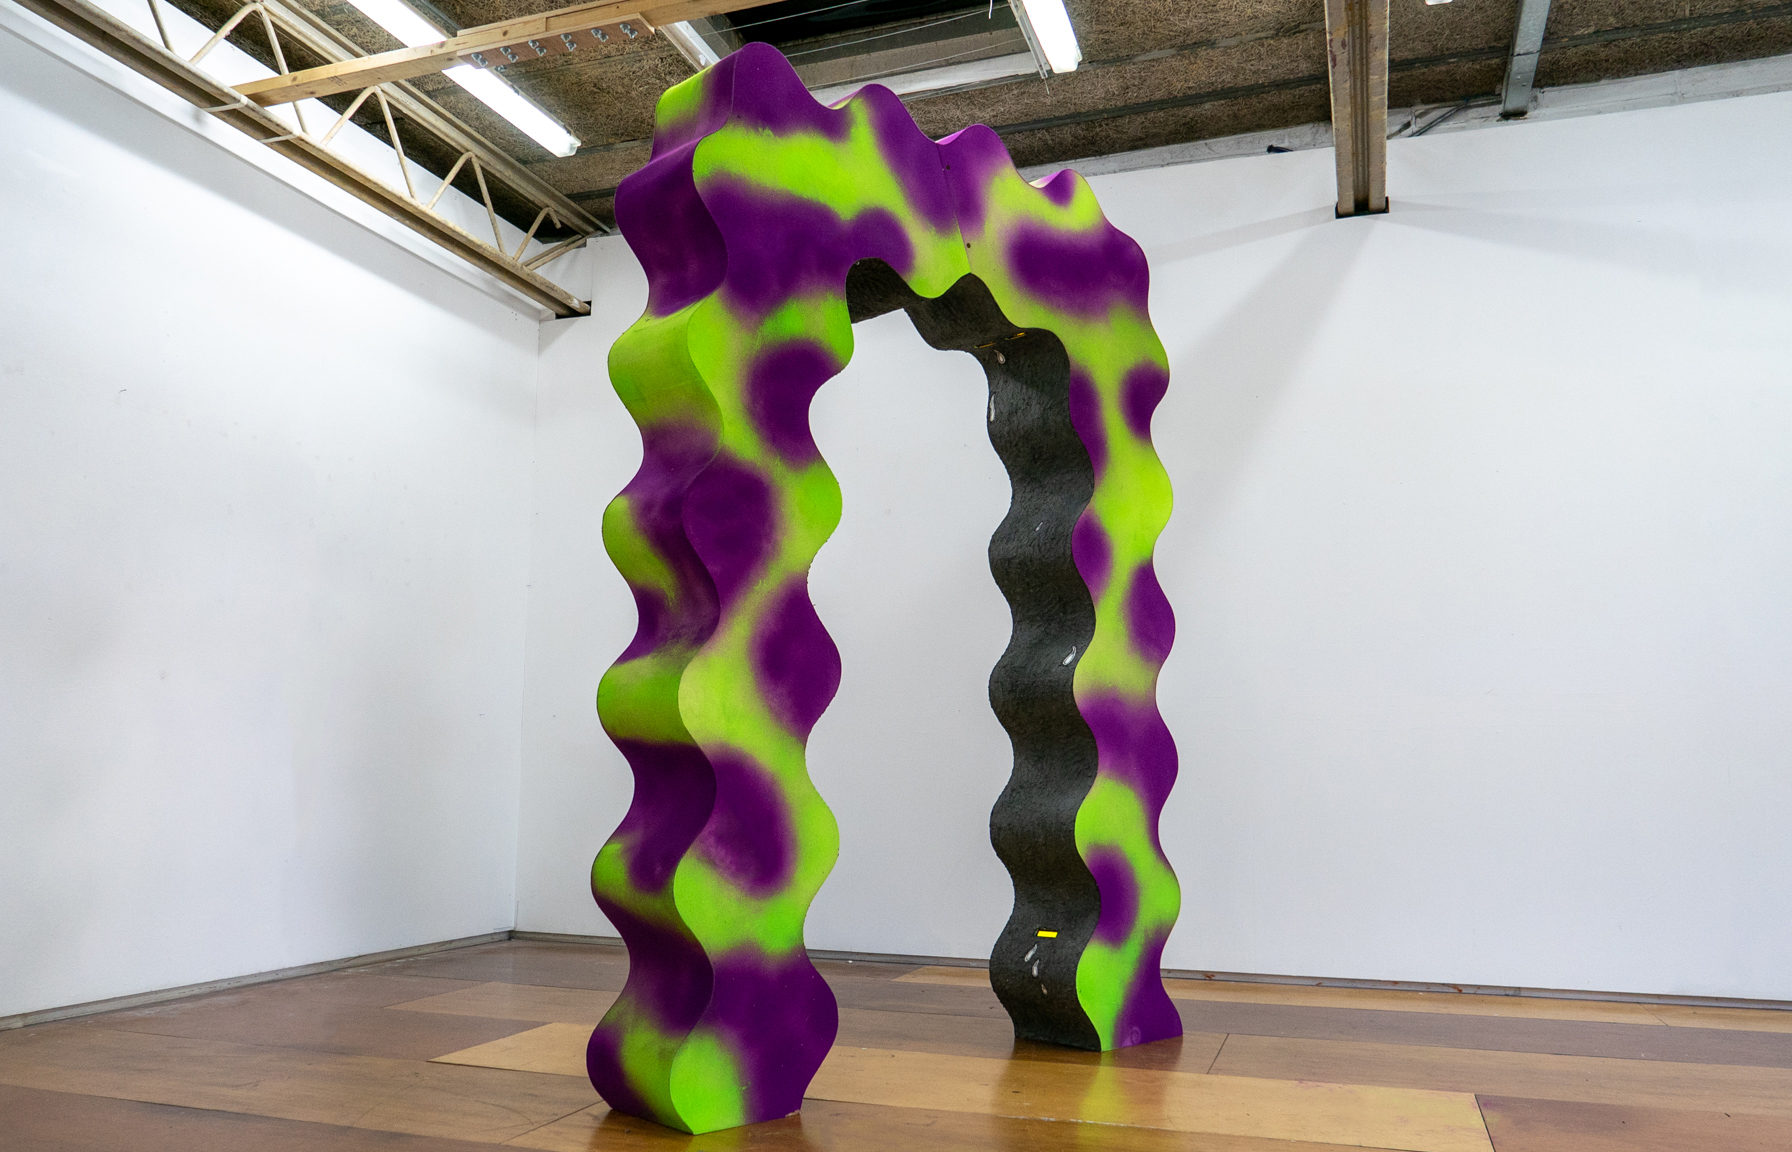 An image of a large, green and purple wavy doorway standing in the centre of a room.